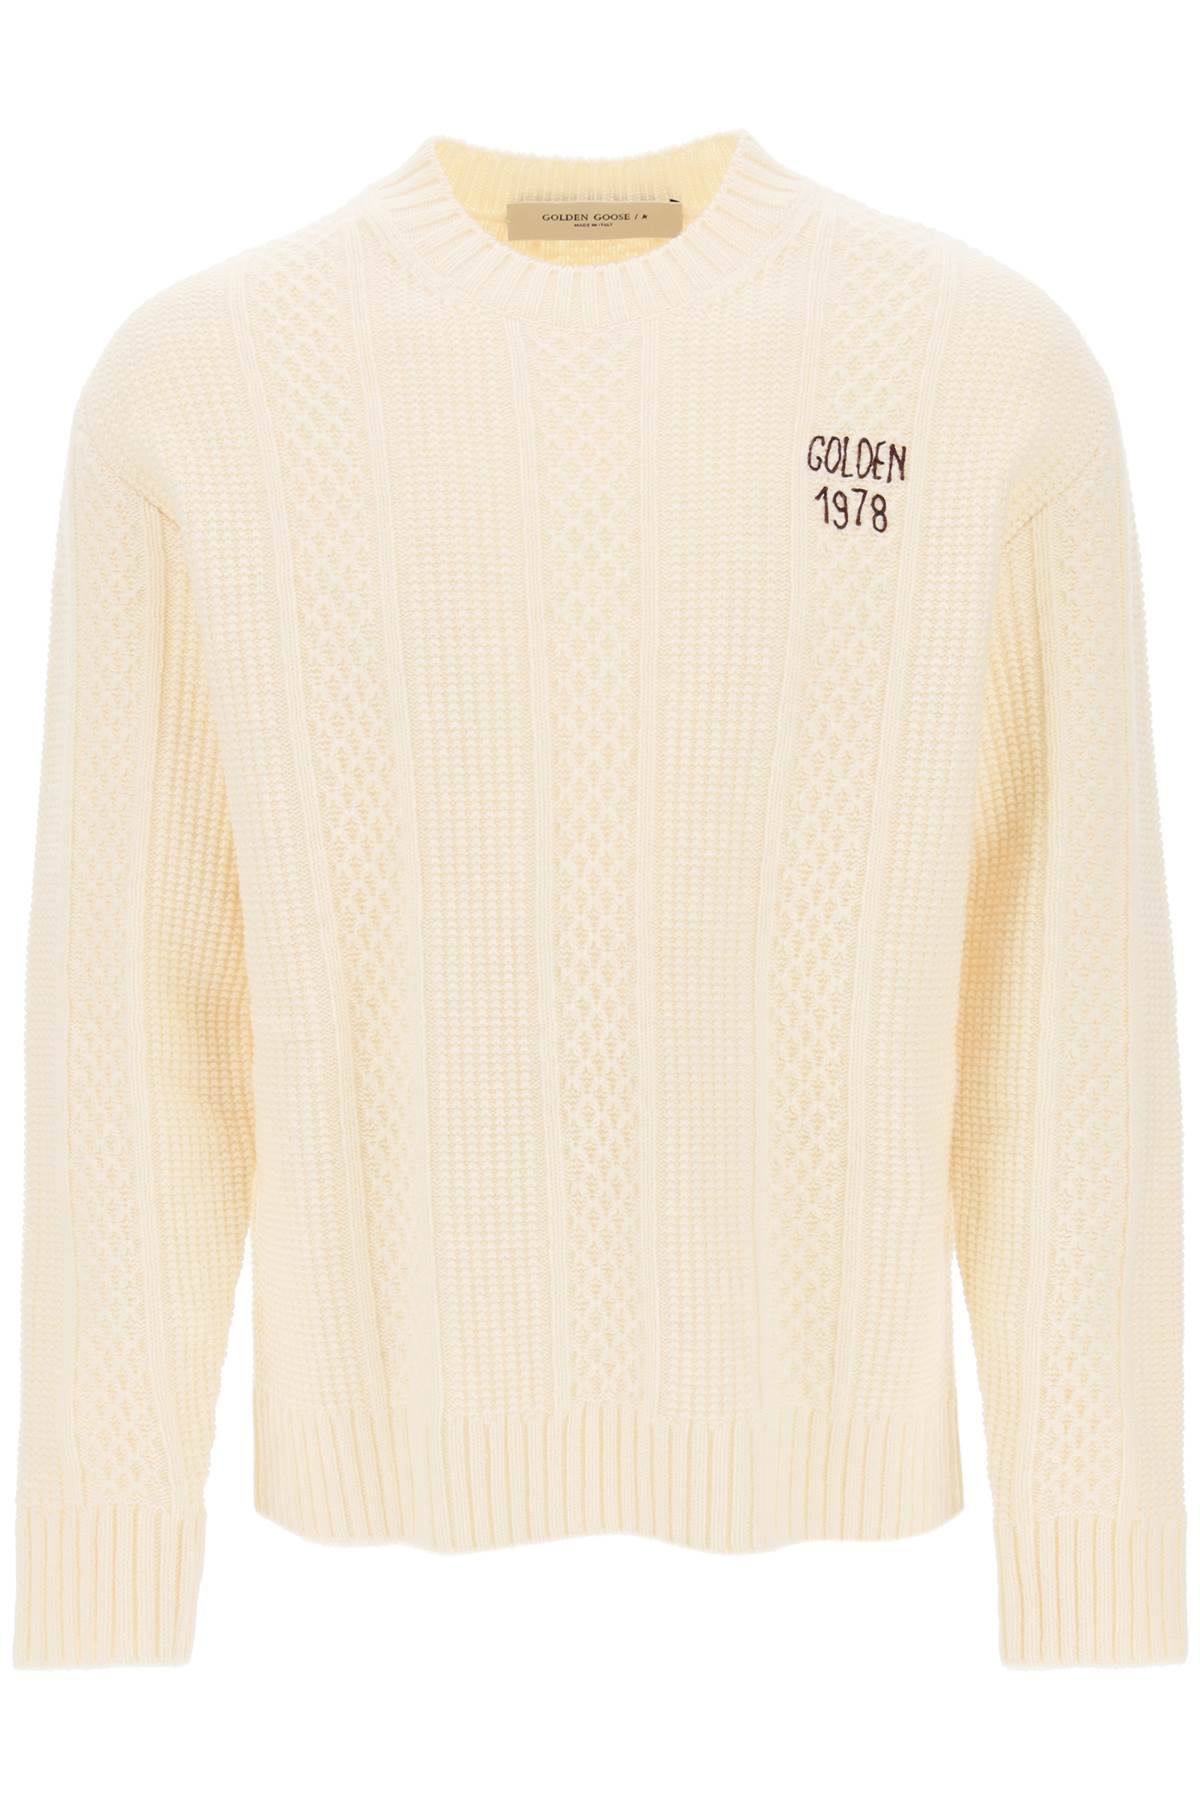 Golden goose sweater with hand-embroidered logo GMP00841 P001279 LAMB S WOOL SASSFRASS